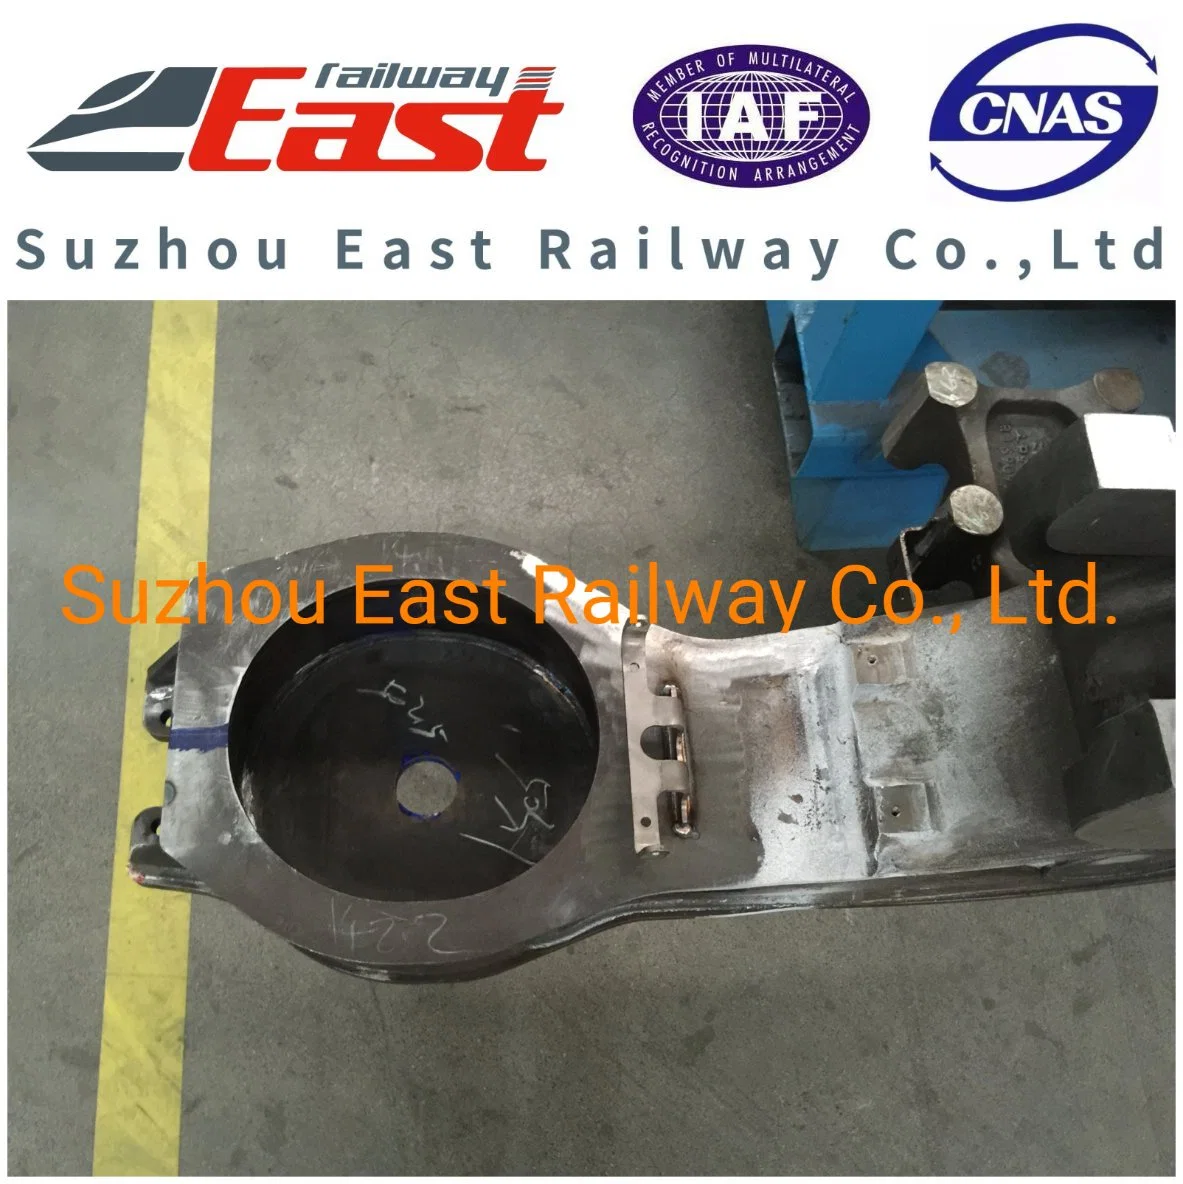 Railway Carbon Steel Car Body for Wagon and Passenger Car